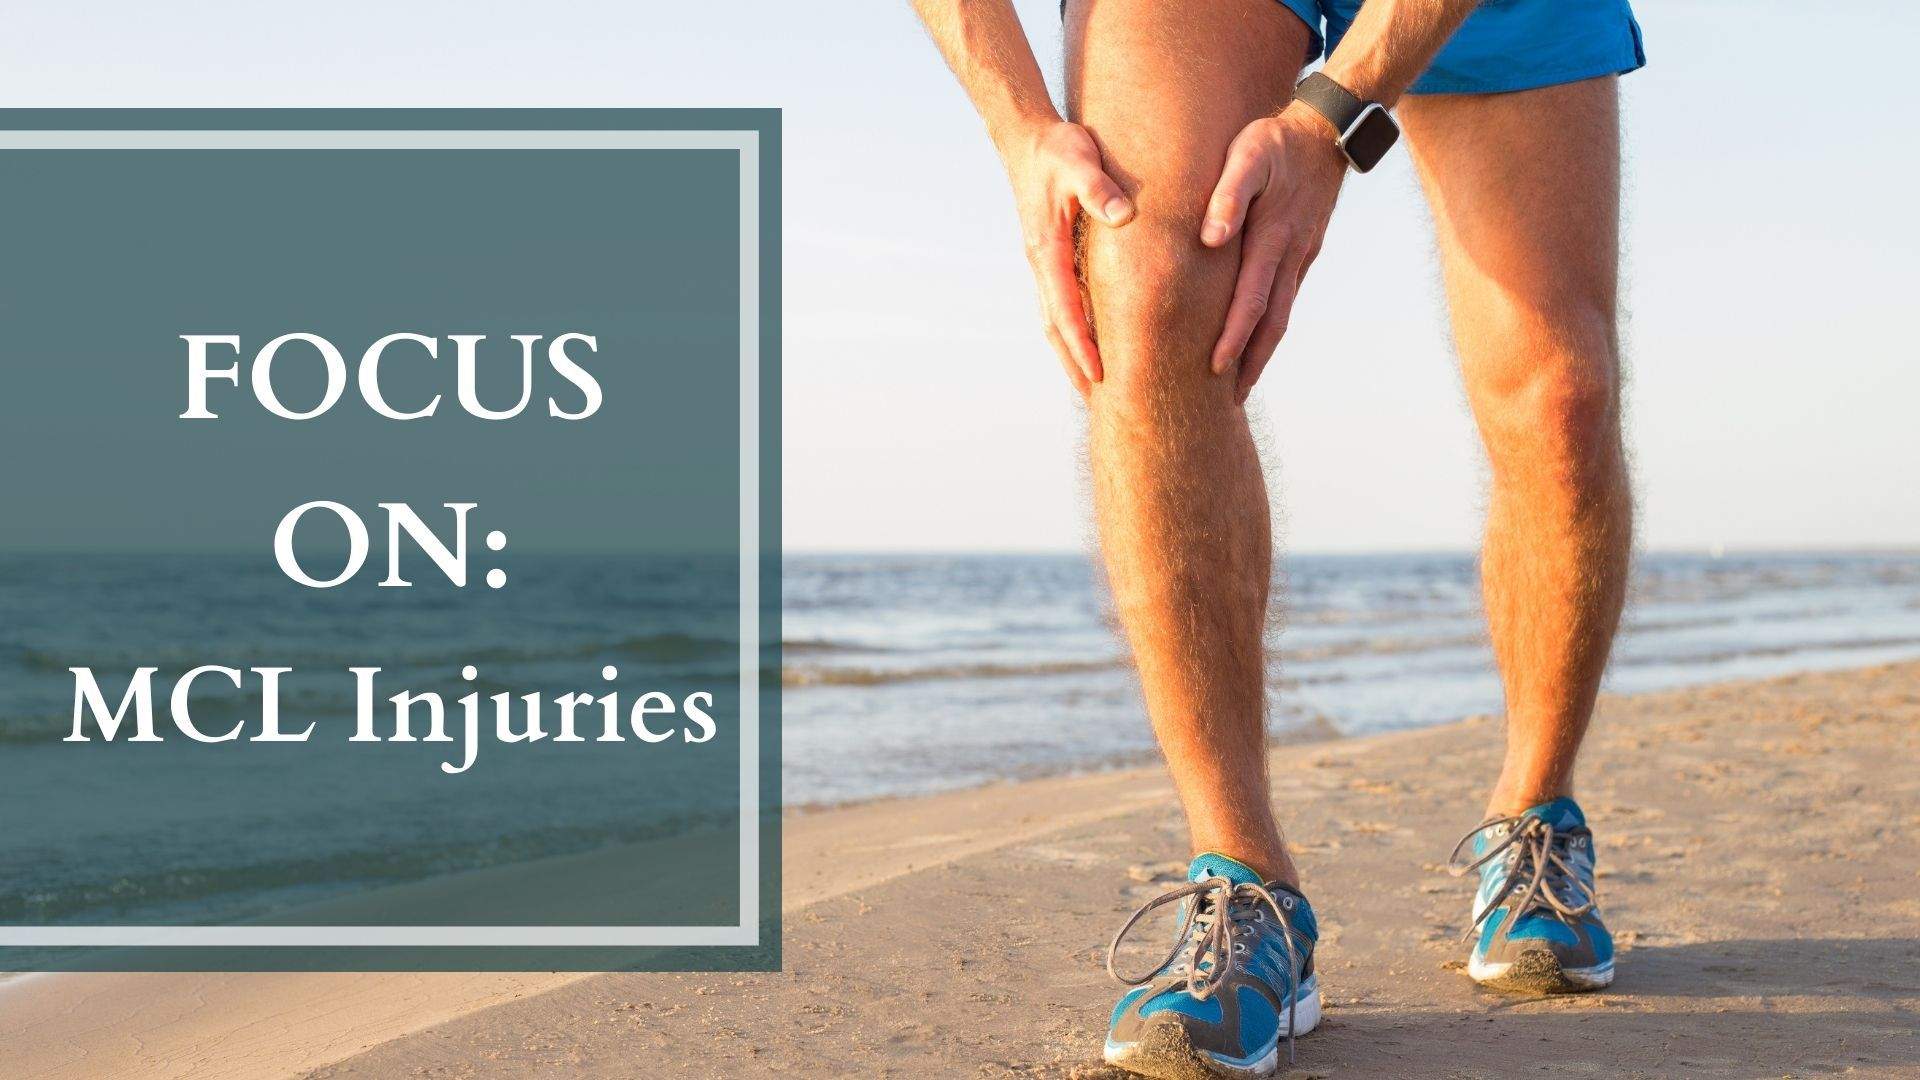 Focus On: MCL Injuries